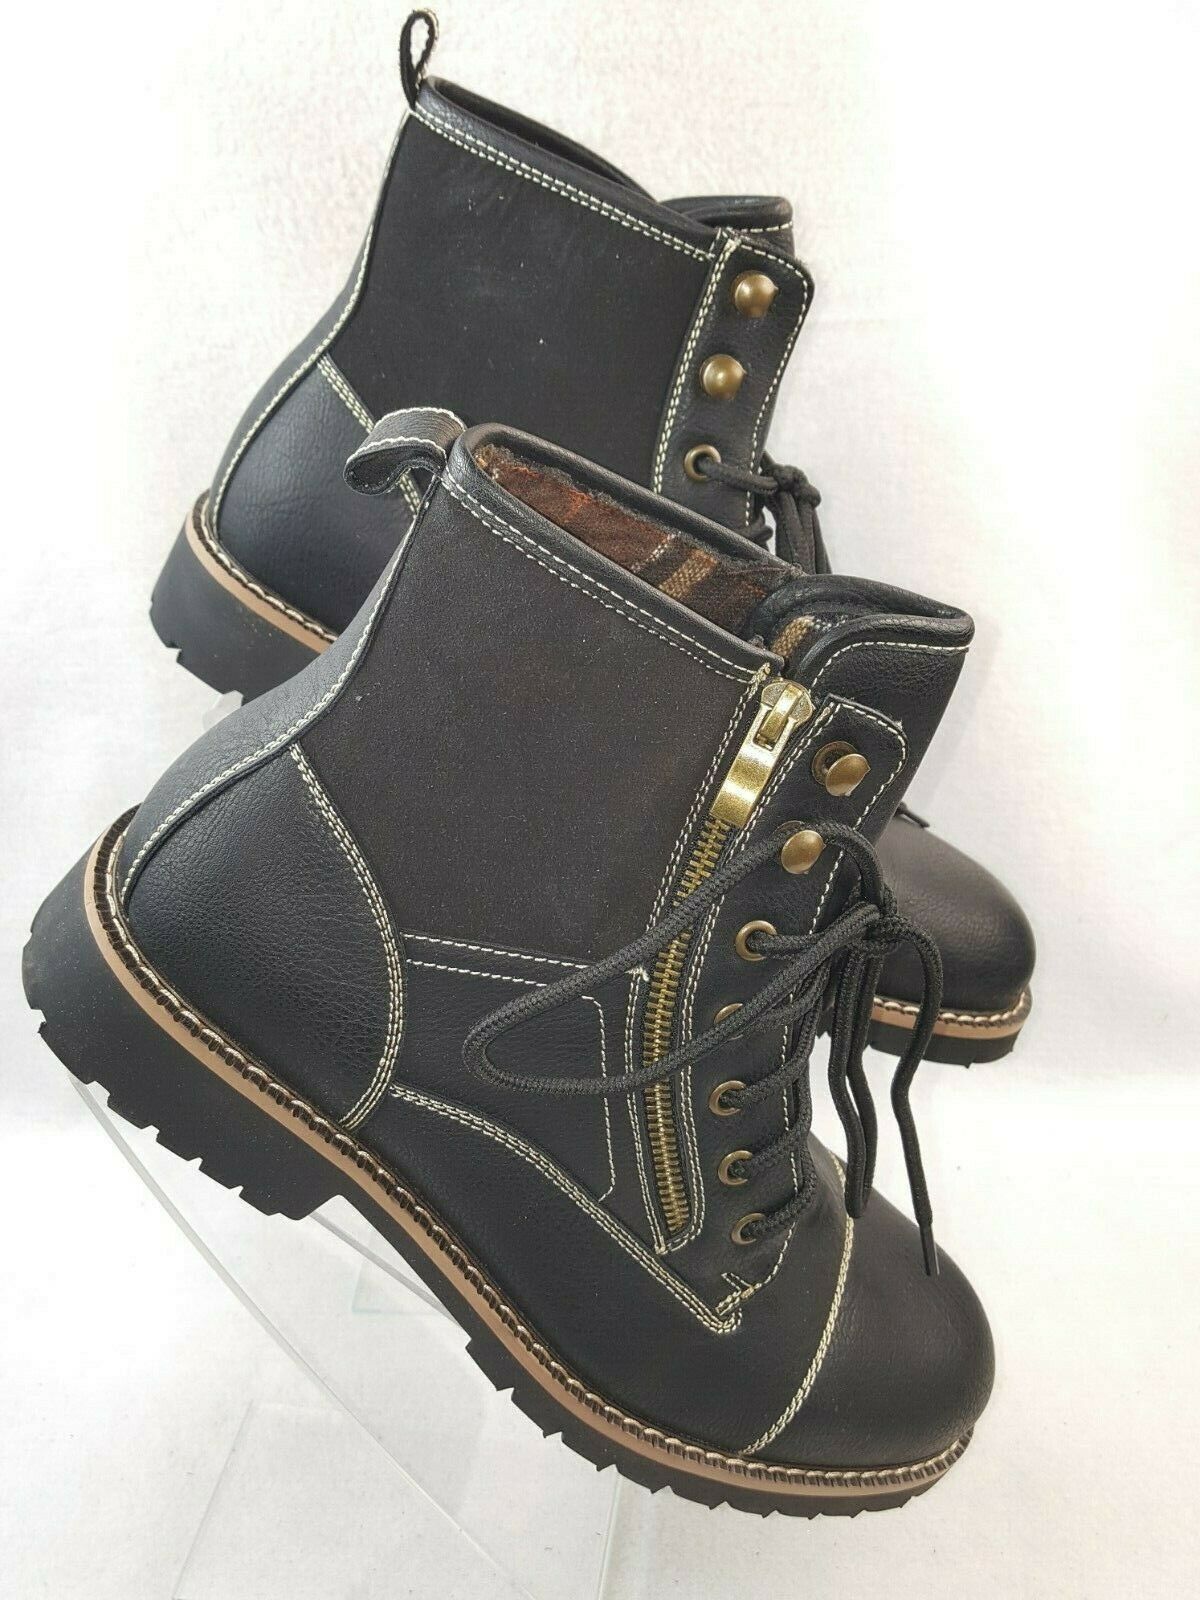 Ferro Aldo "Cody"Men's Motorcycle Boots Black and Brown Size 9.5 to 11